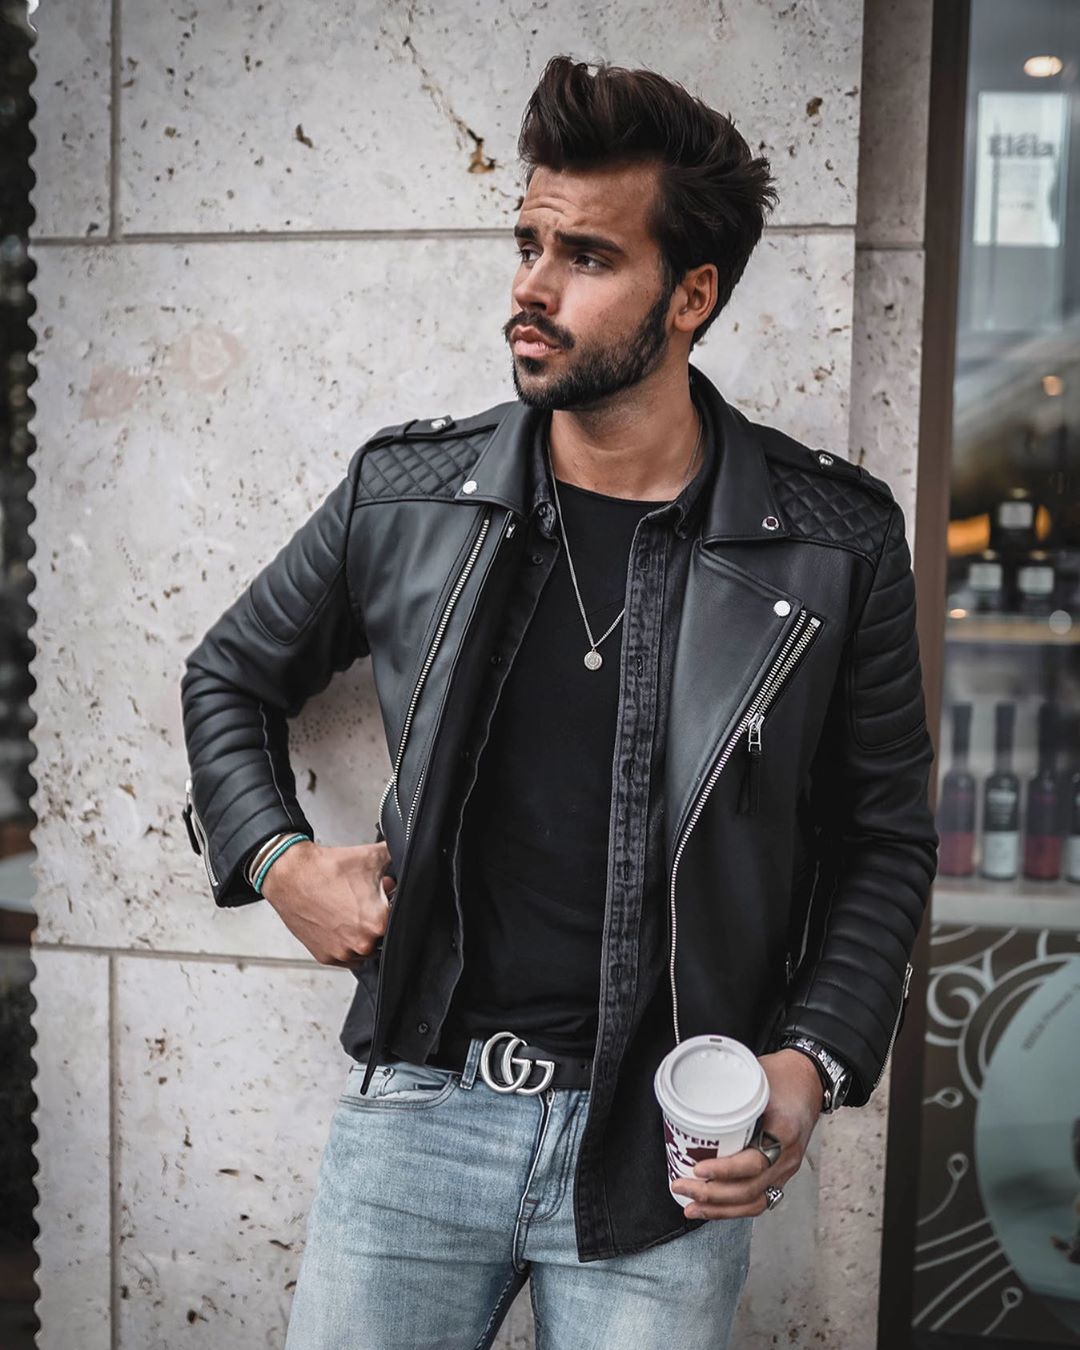 Style your leather jacket effortlessly